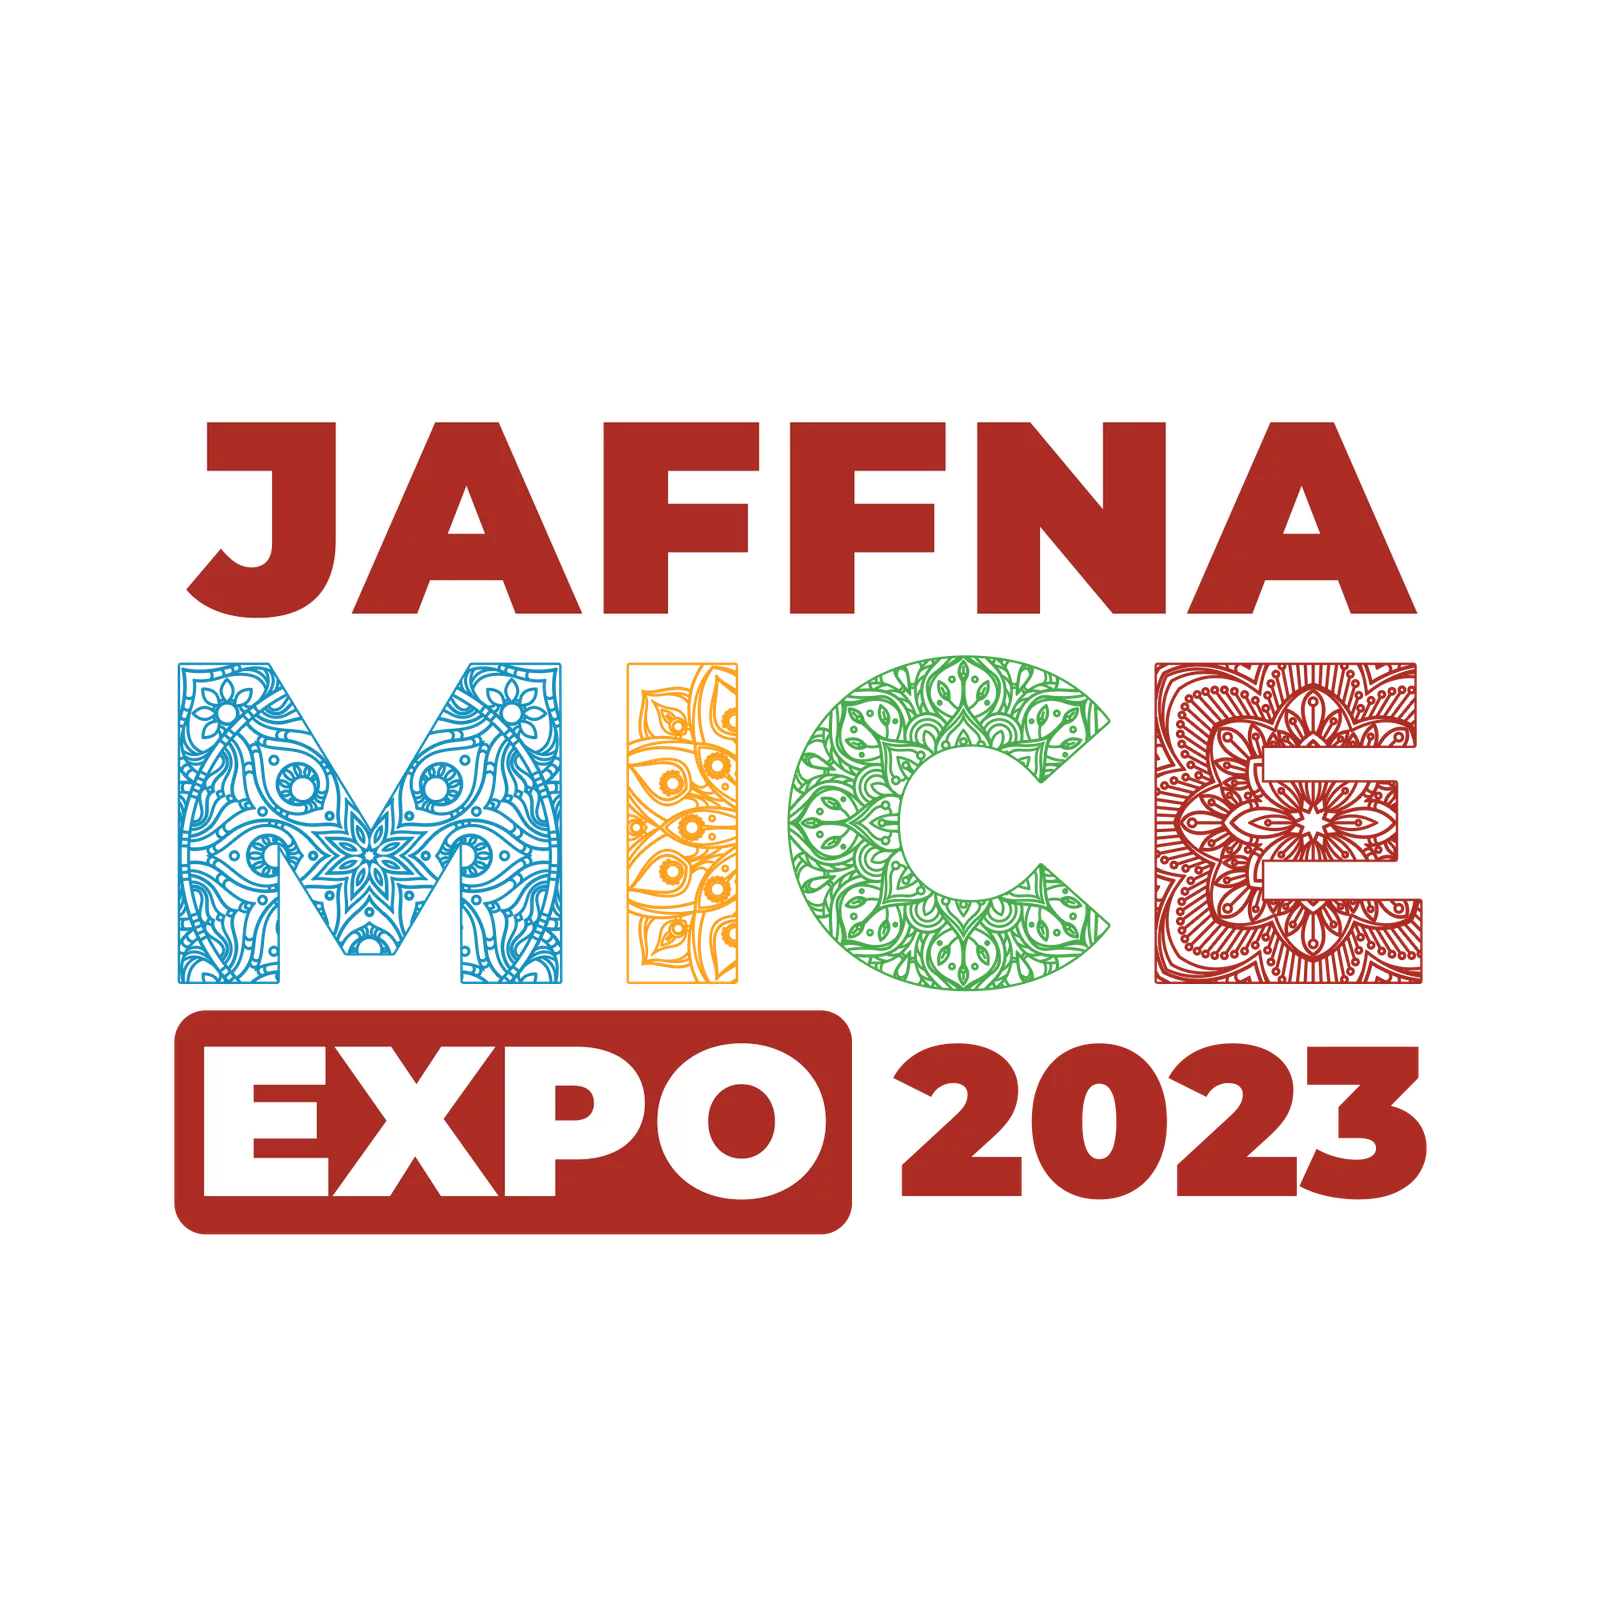 With focus on southern India, Sri Lanka to organise Jaffna MICE Expo 2023 in October